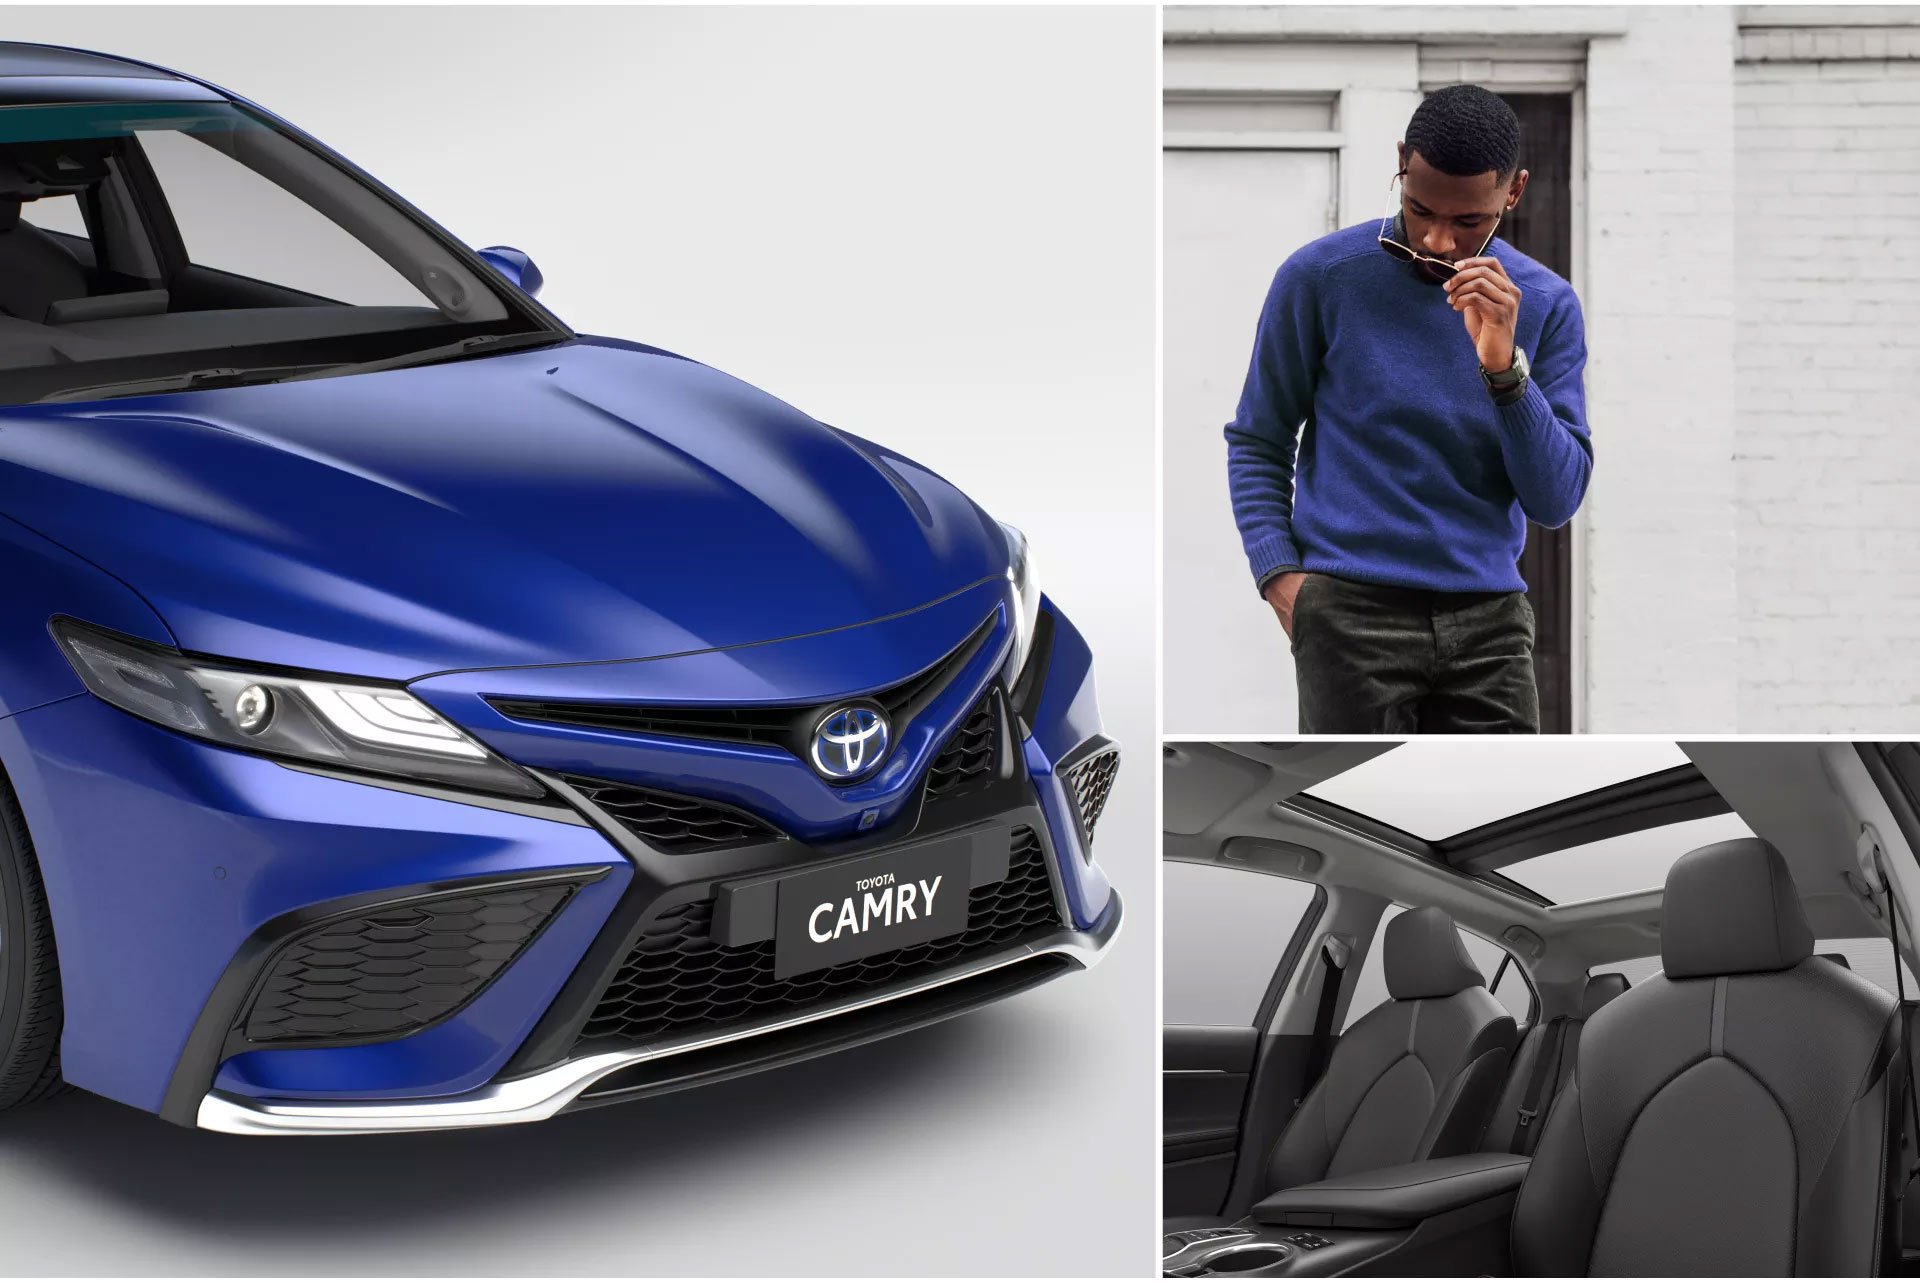 New-Look Camry